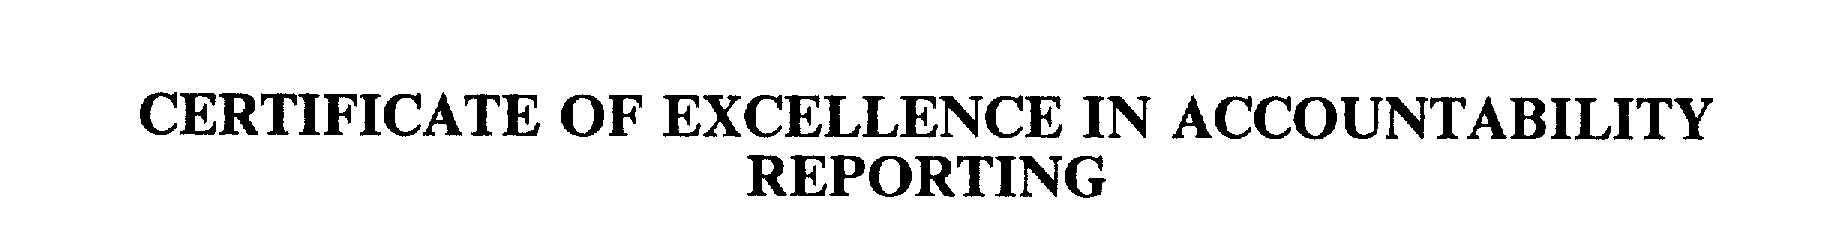  CERTIFICATE OF EXCELLENCE IN ACCOUNTABILITY REPORTING